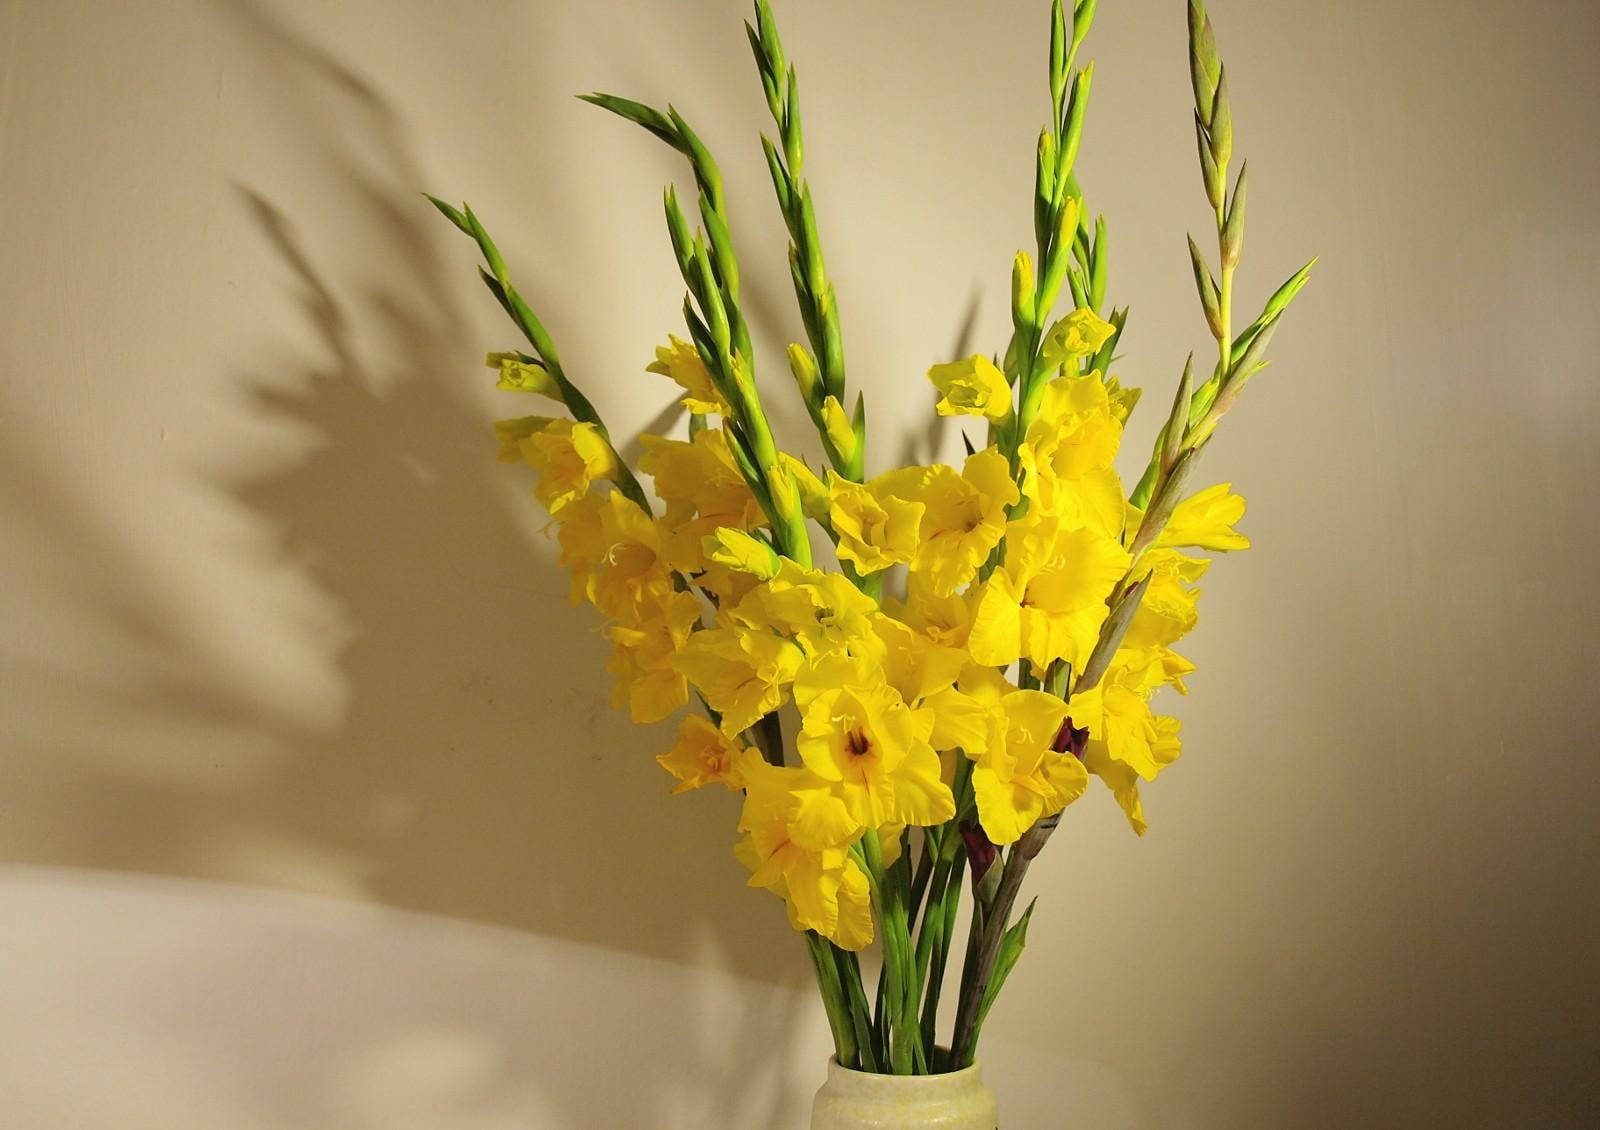 Vibrant Yellow Gladiolus Flowers In A Vase